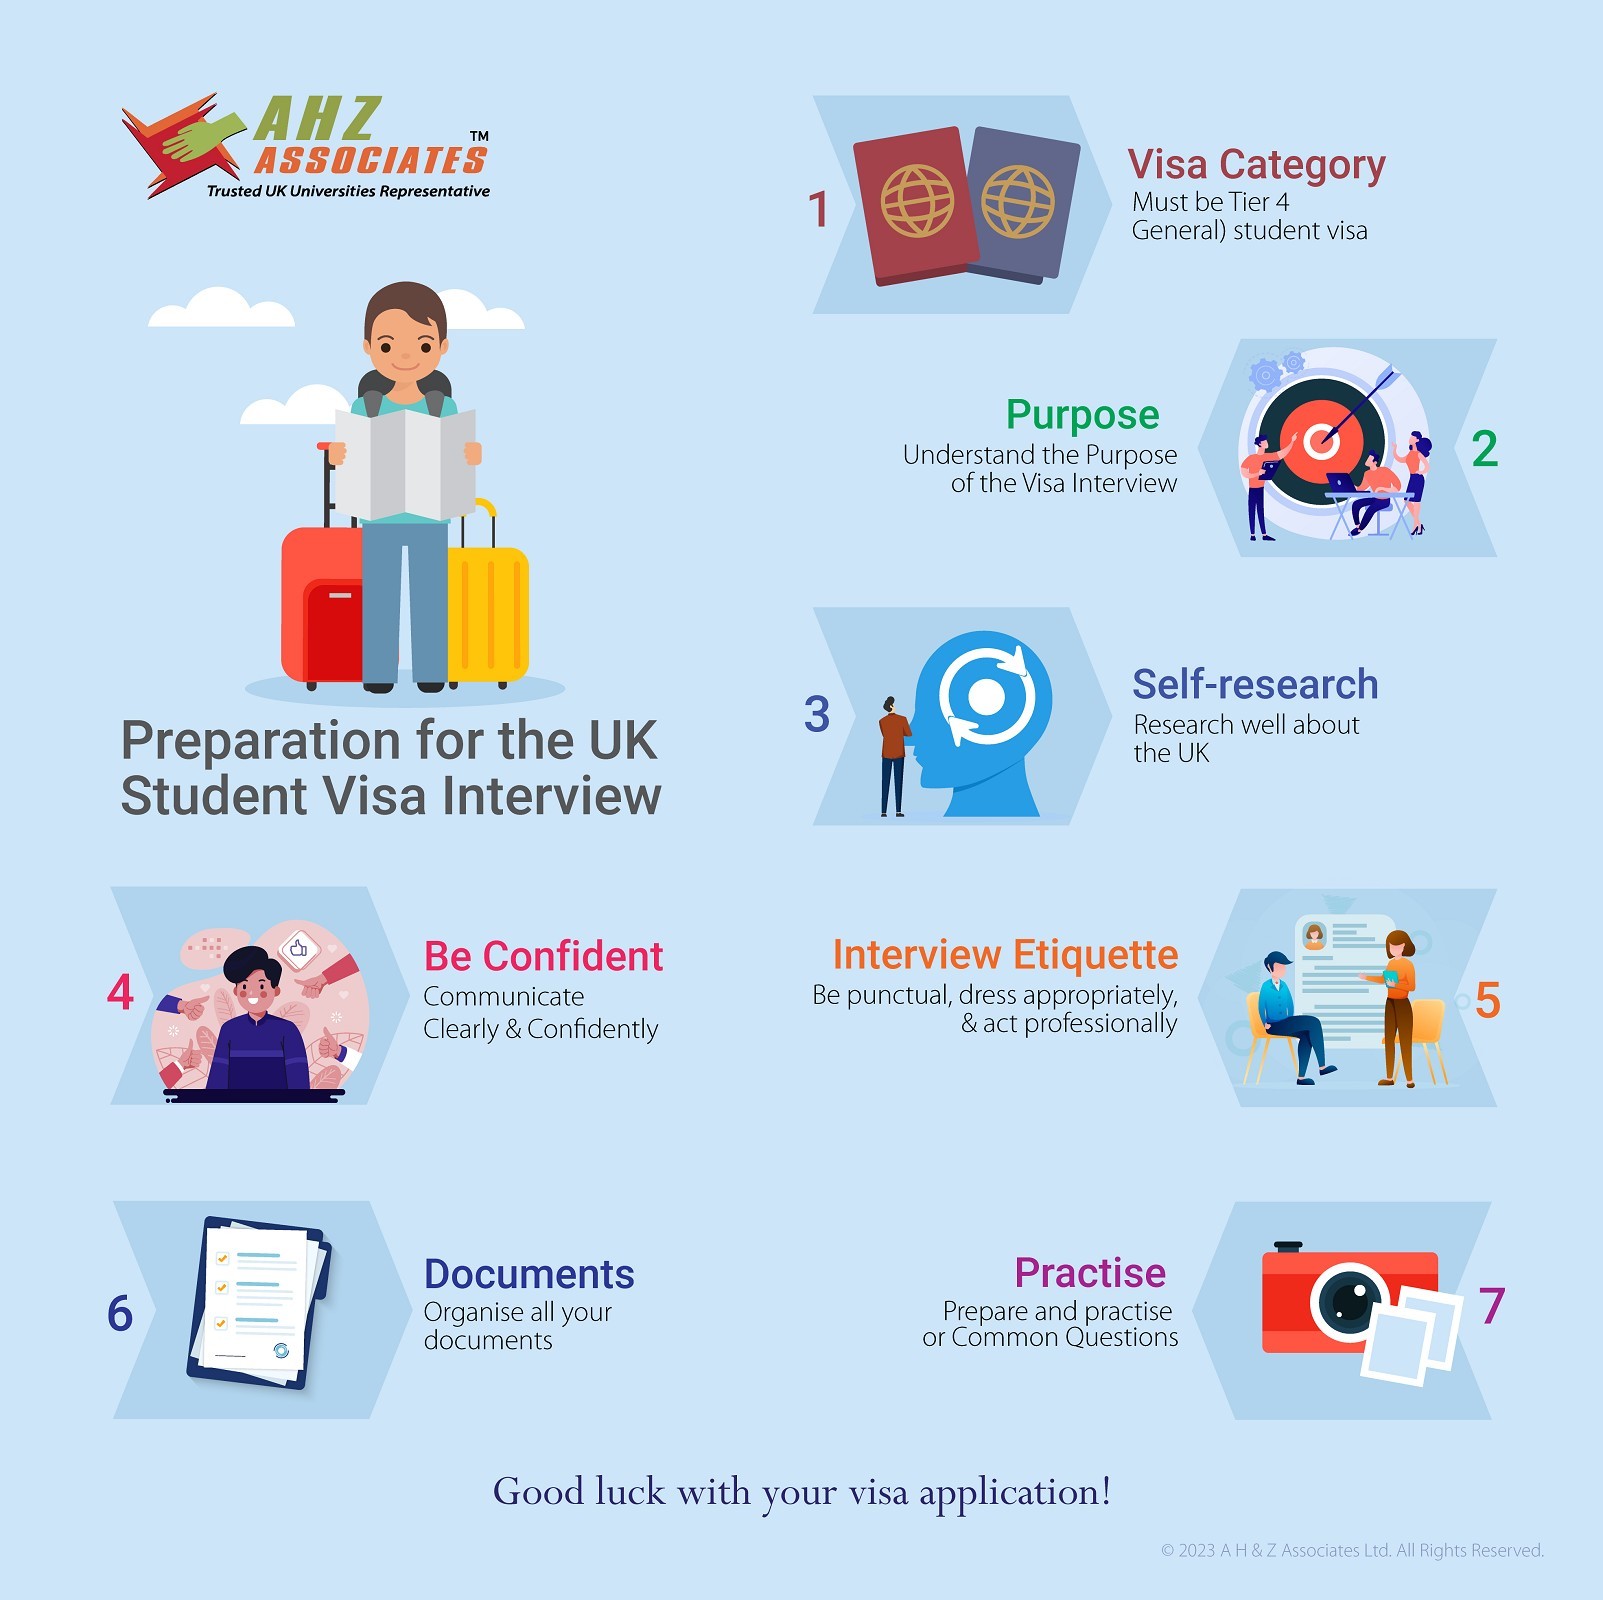 Preperation for the UK Student Visa Interview